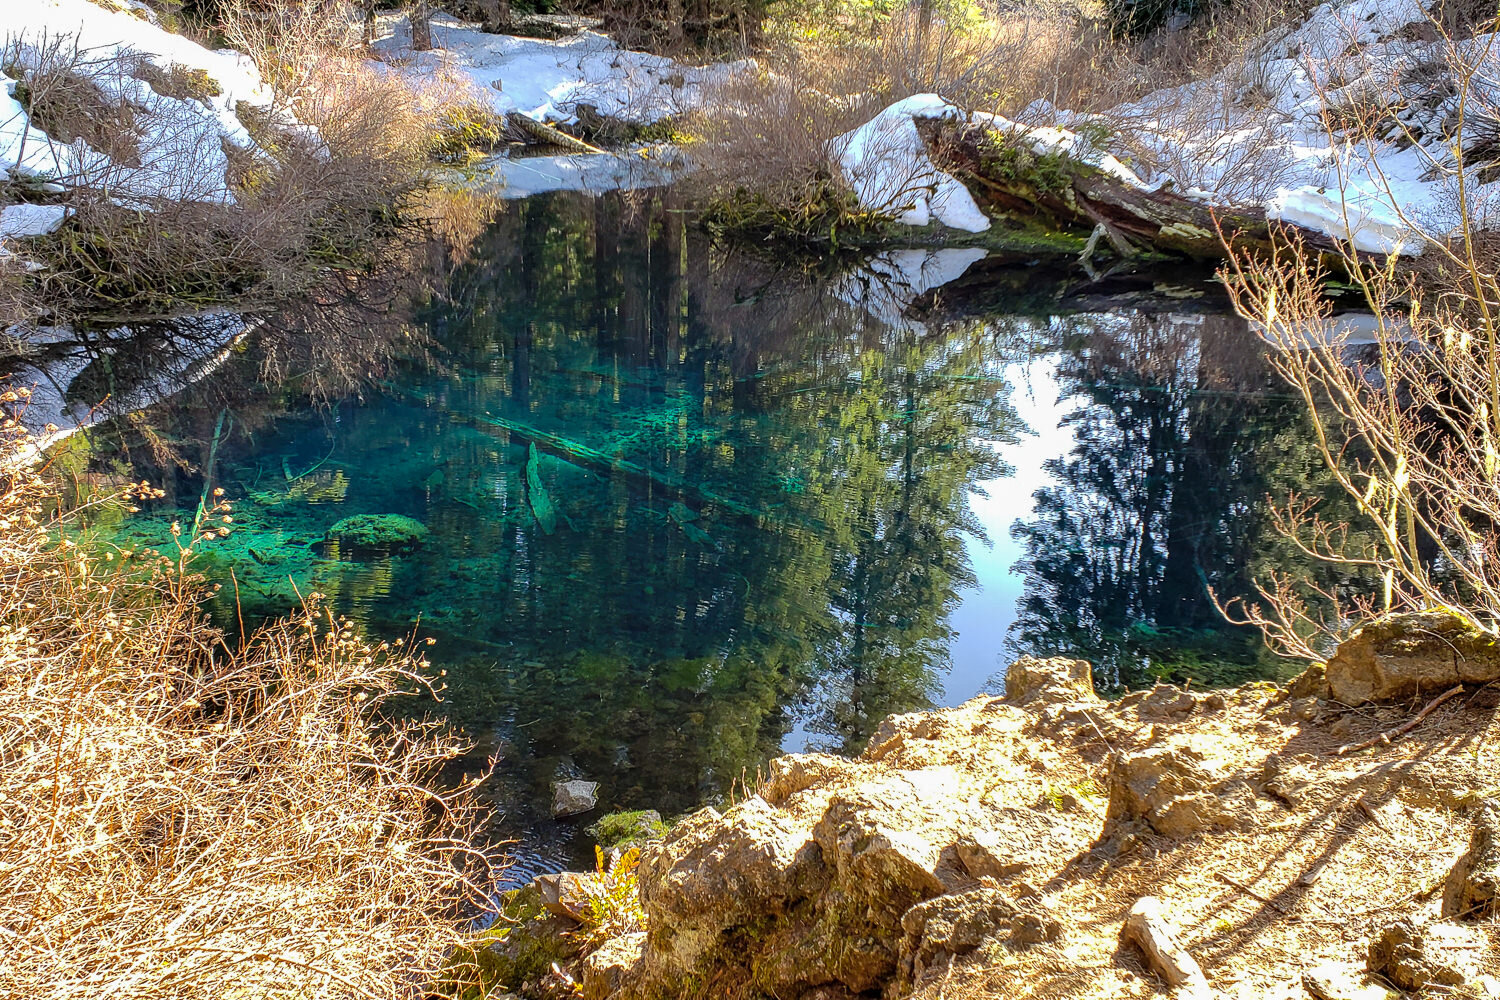 The MRT wanders past jaw-dropping crystal-clear blue waters - The Great Spring above is the source of the McKenzie R.